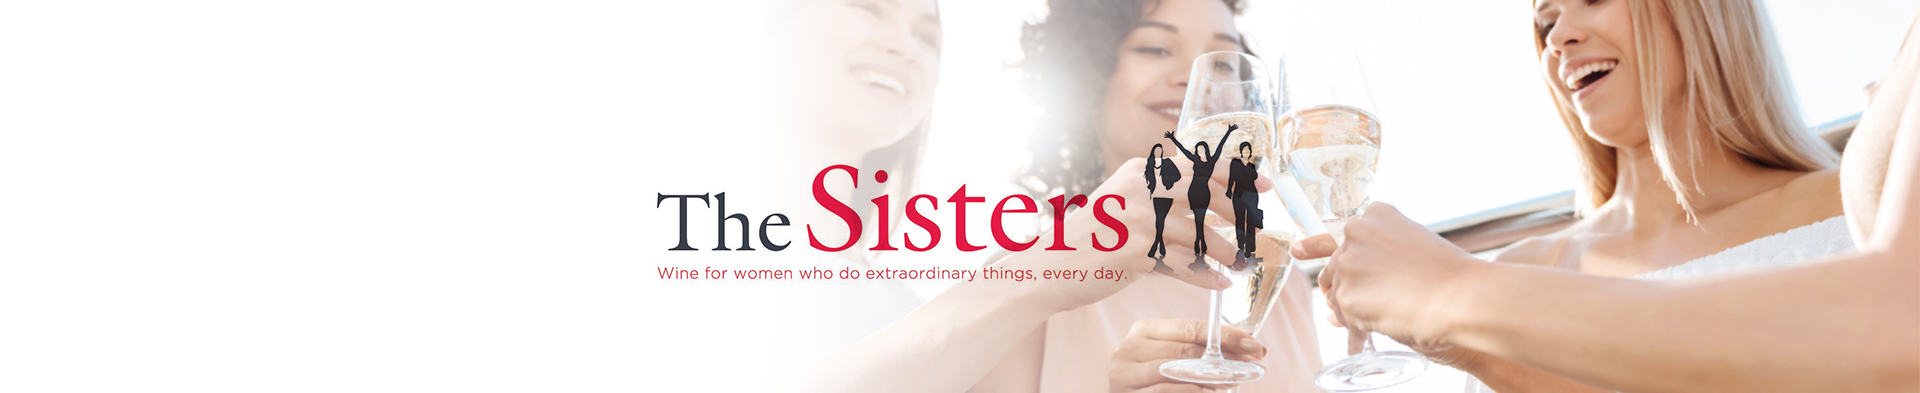 The Sisters Wines Banner